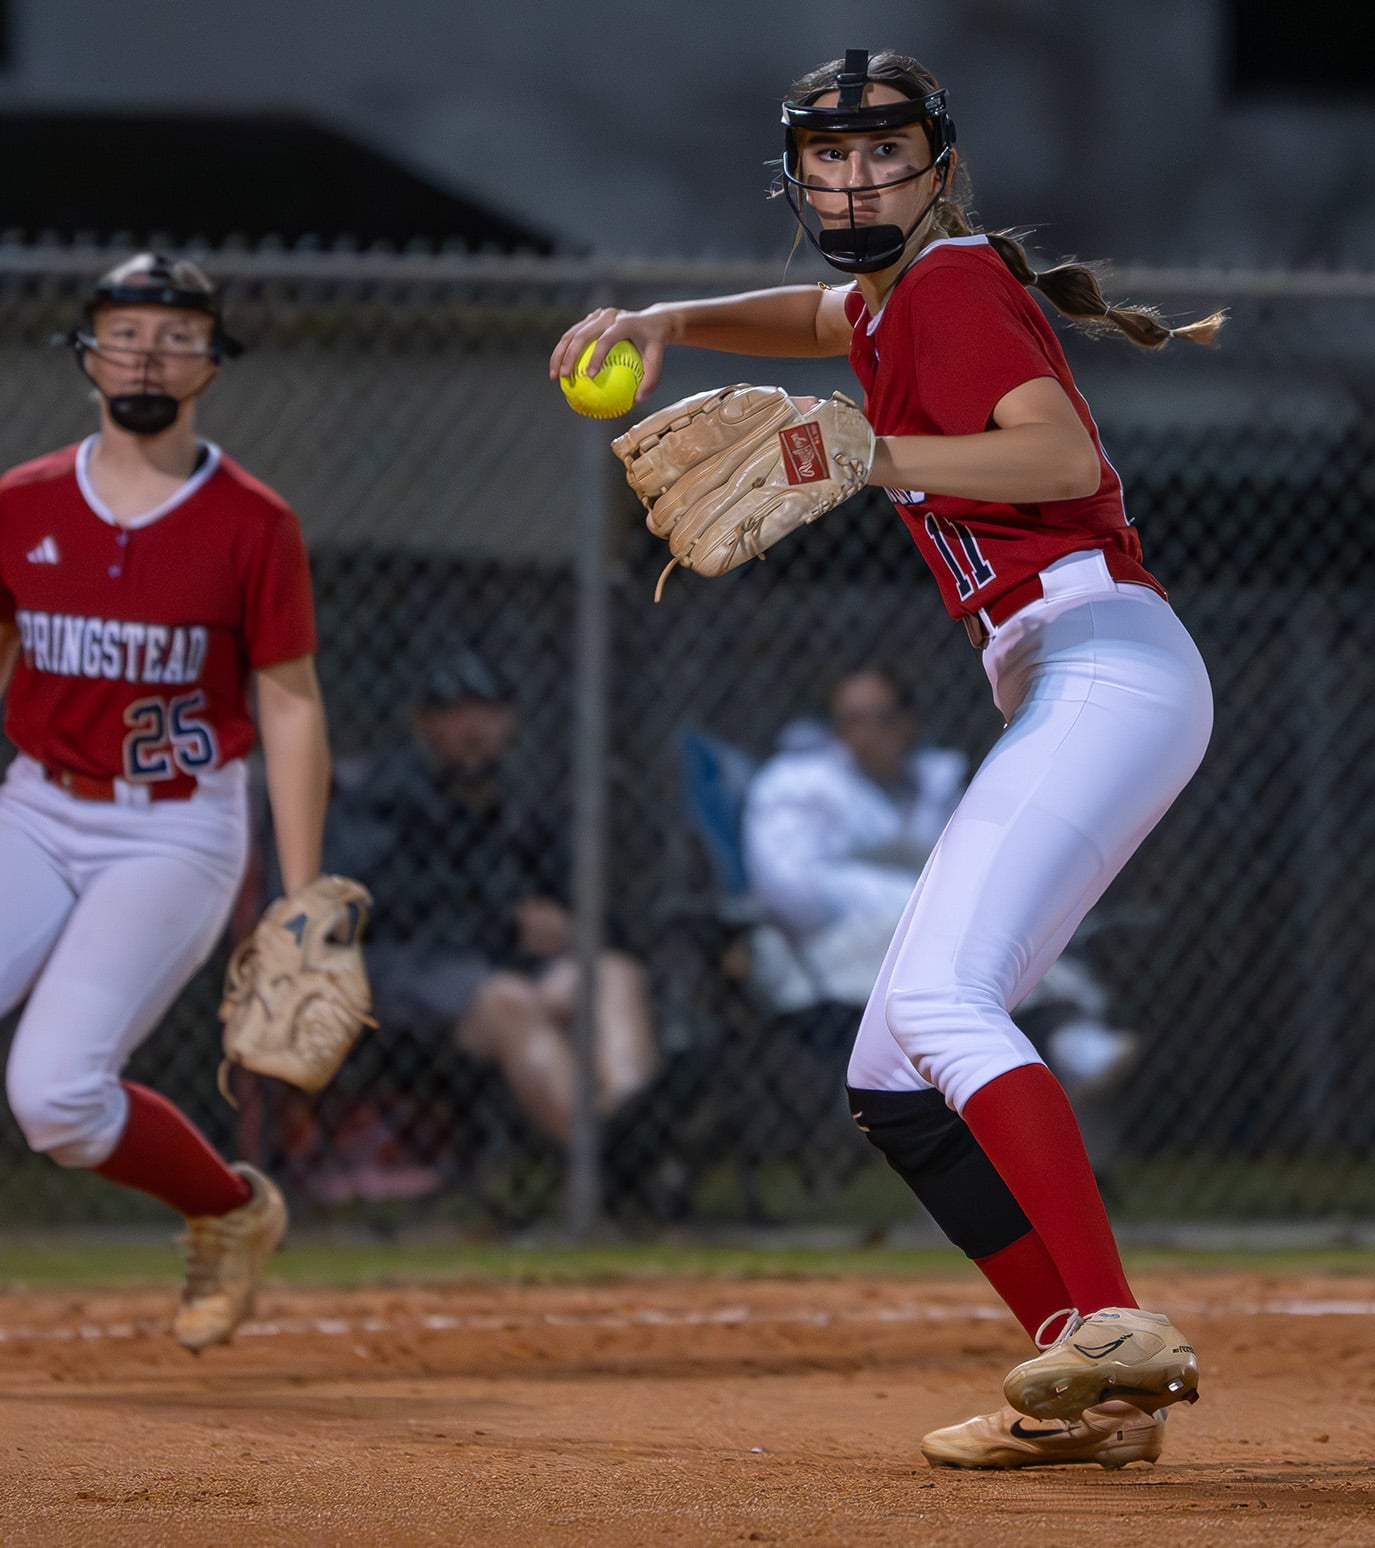 Springstead pitcher, Ava Miller throws to first base Tuesday night in the game with visiting Weeki Wachee High. [Photo by Joe DiCristofalo]